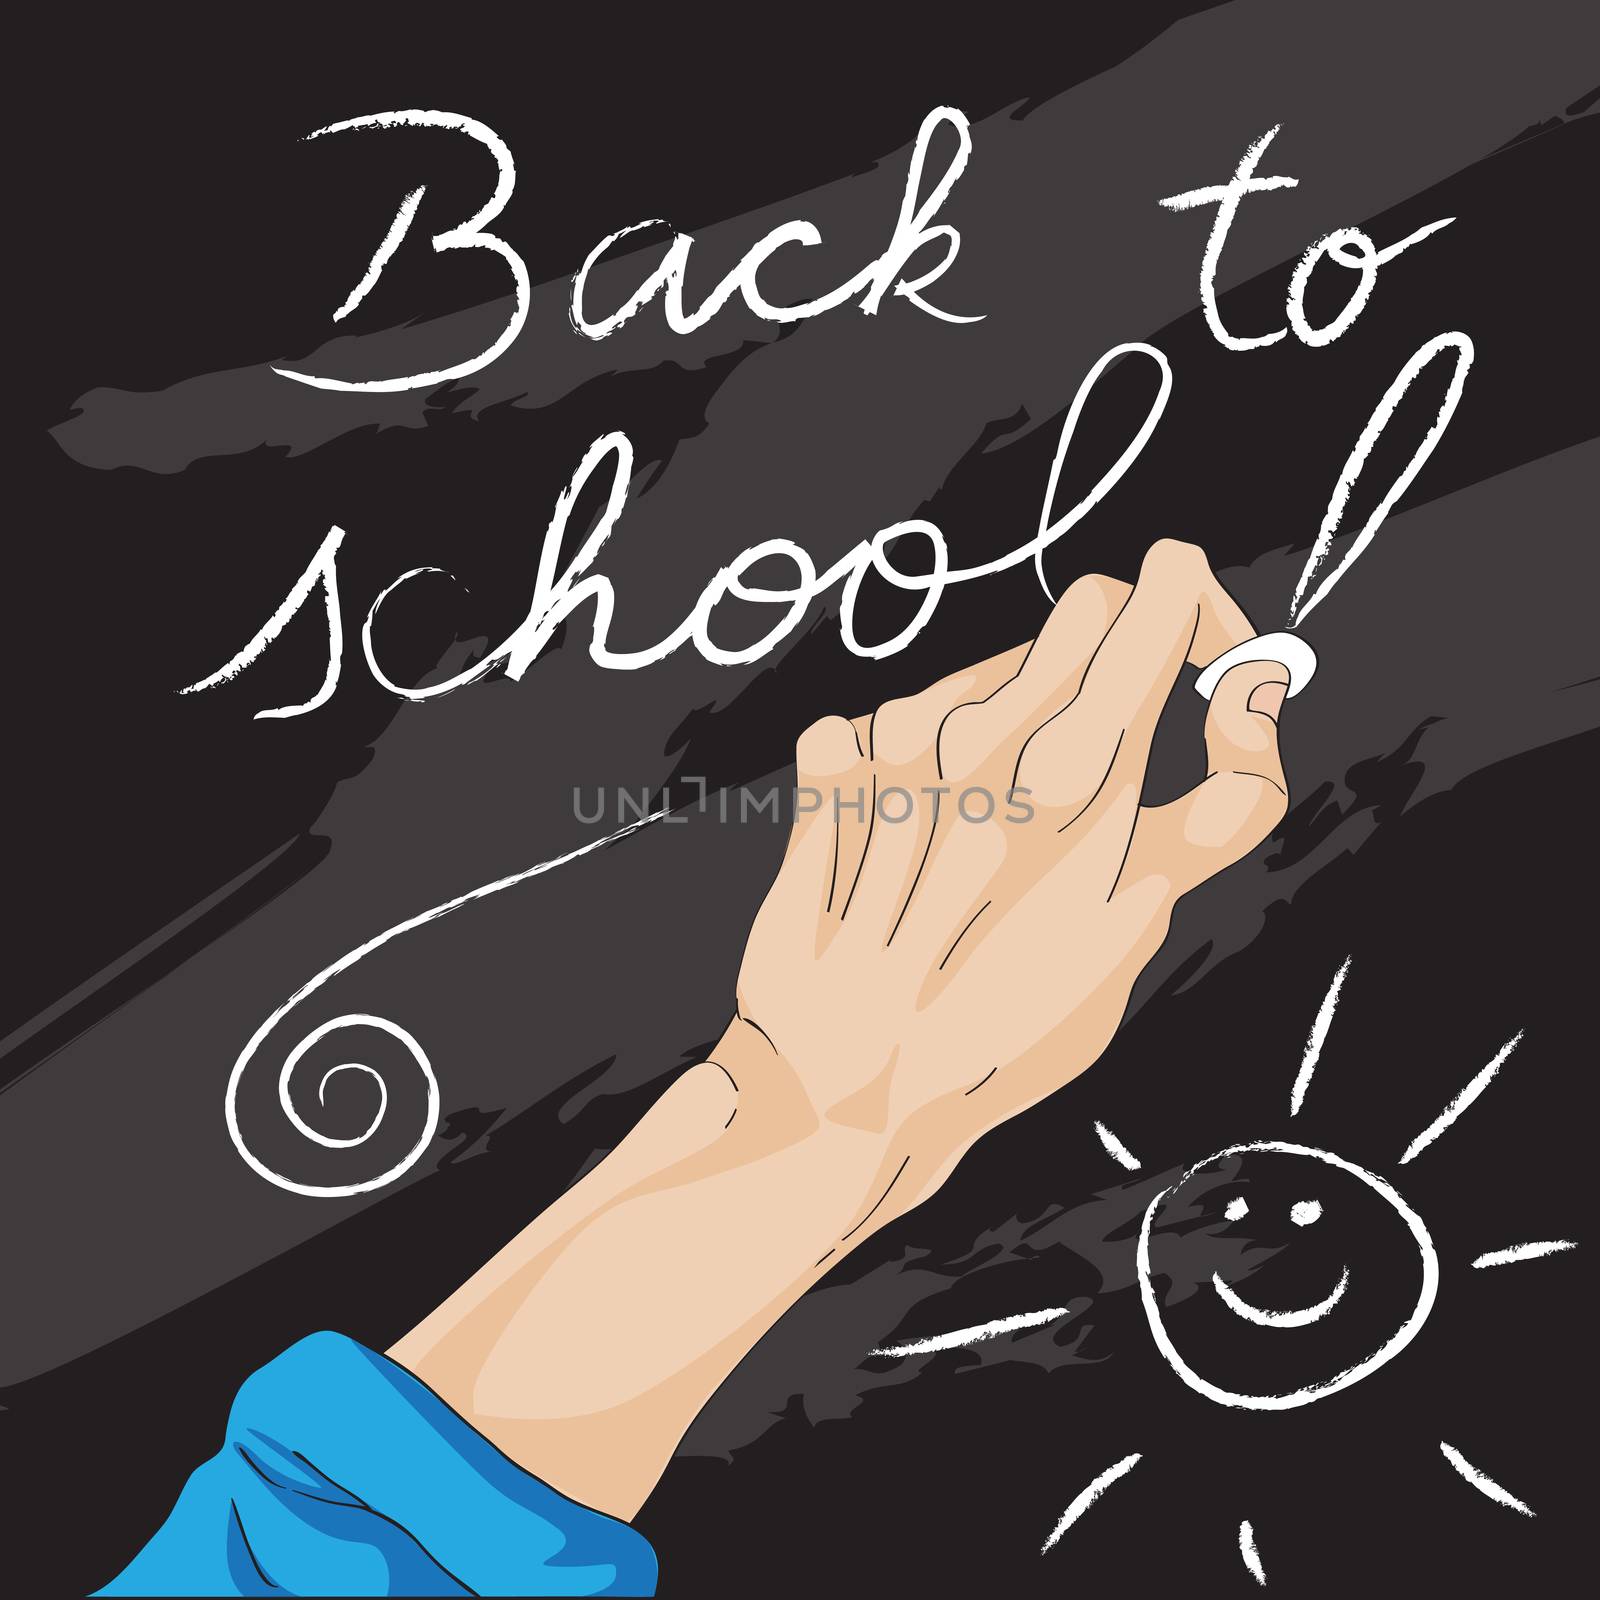 Hand drawn illustration of a human hand writing on the balckboard with chalk, back to school card